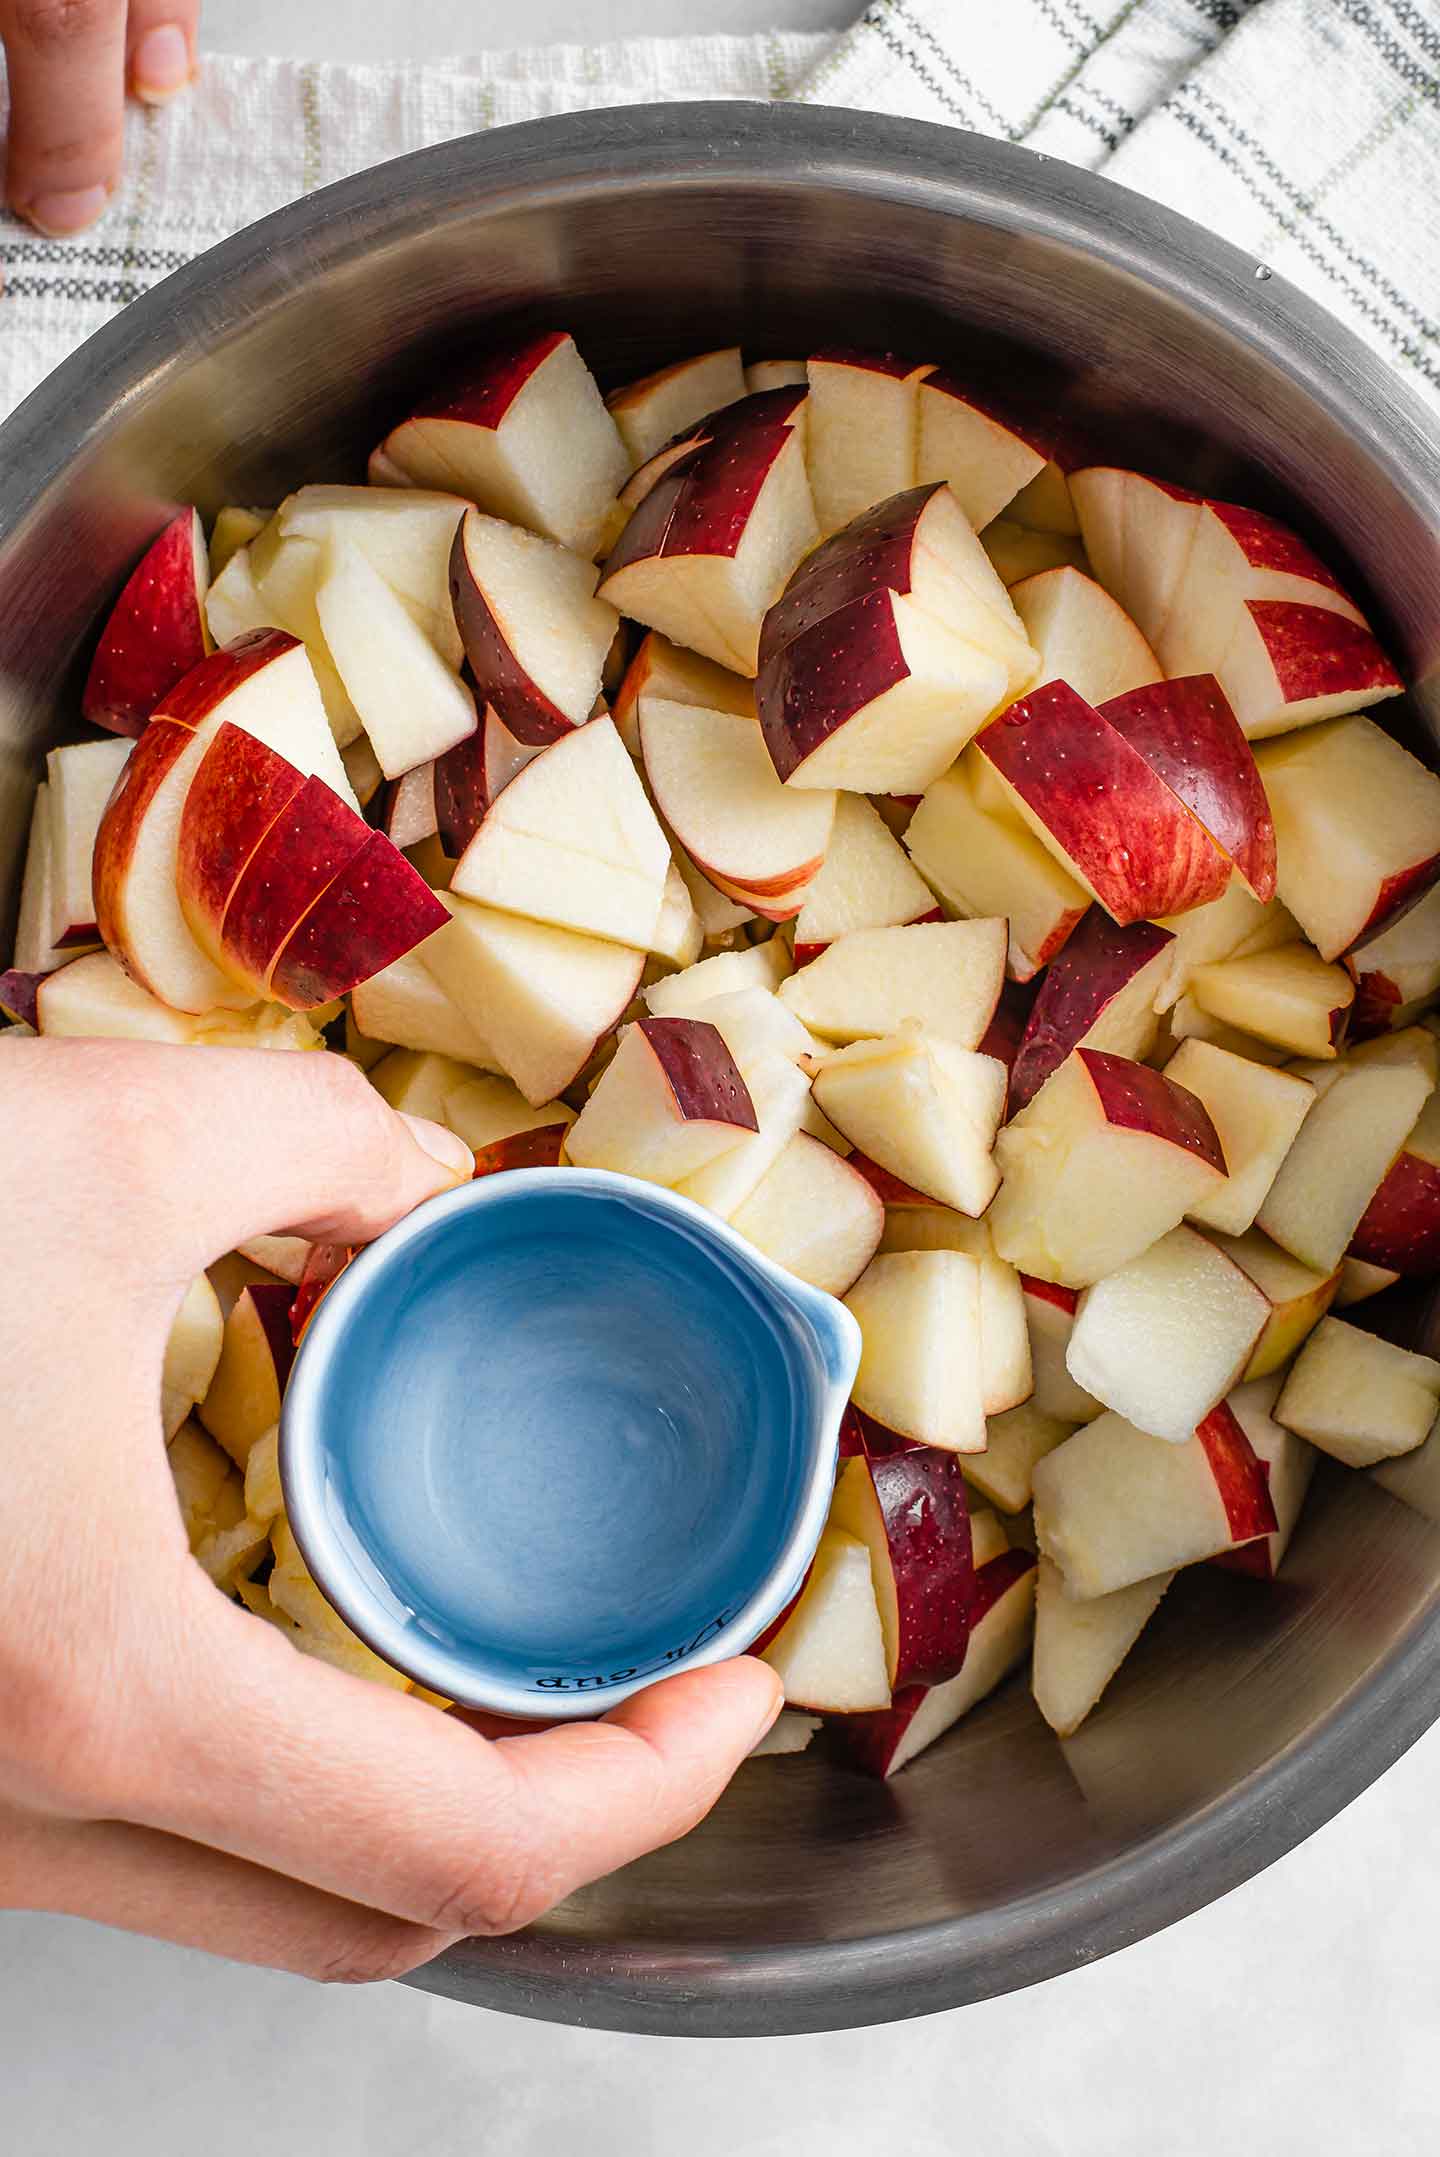 Top down view of diced apples in a saucepan with a small amount of water being poured over top.